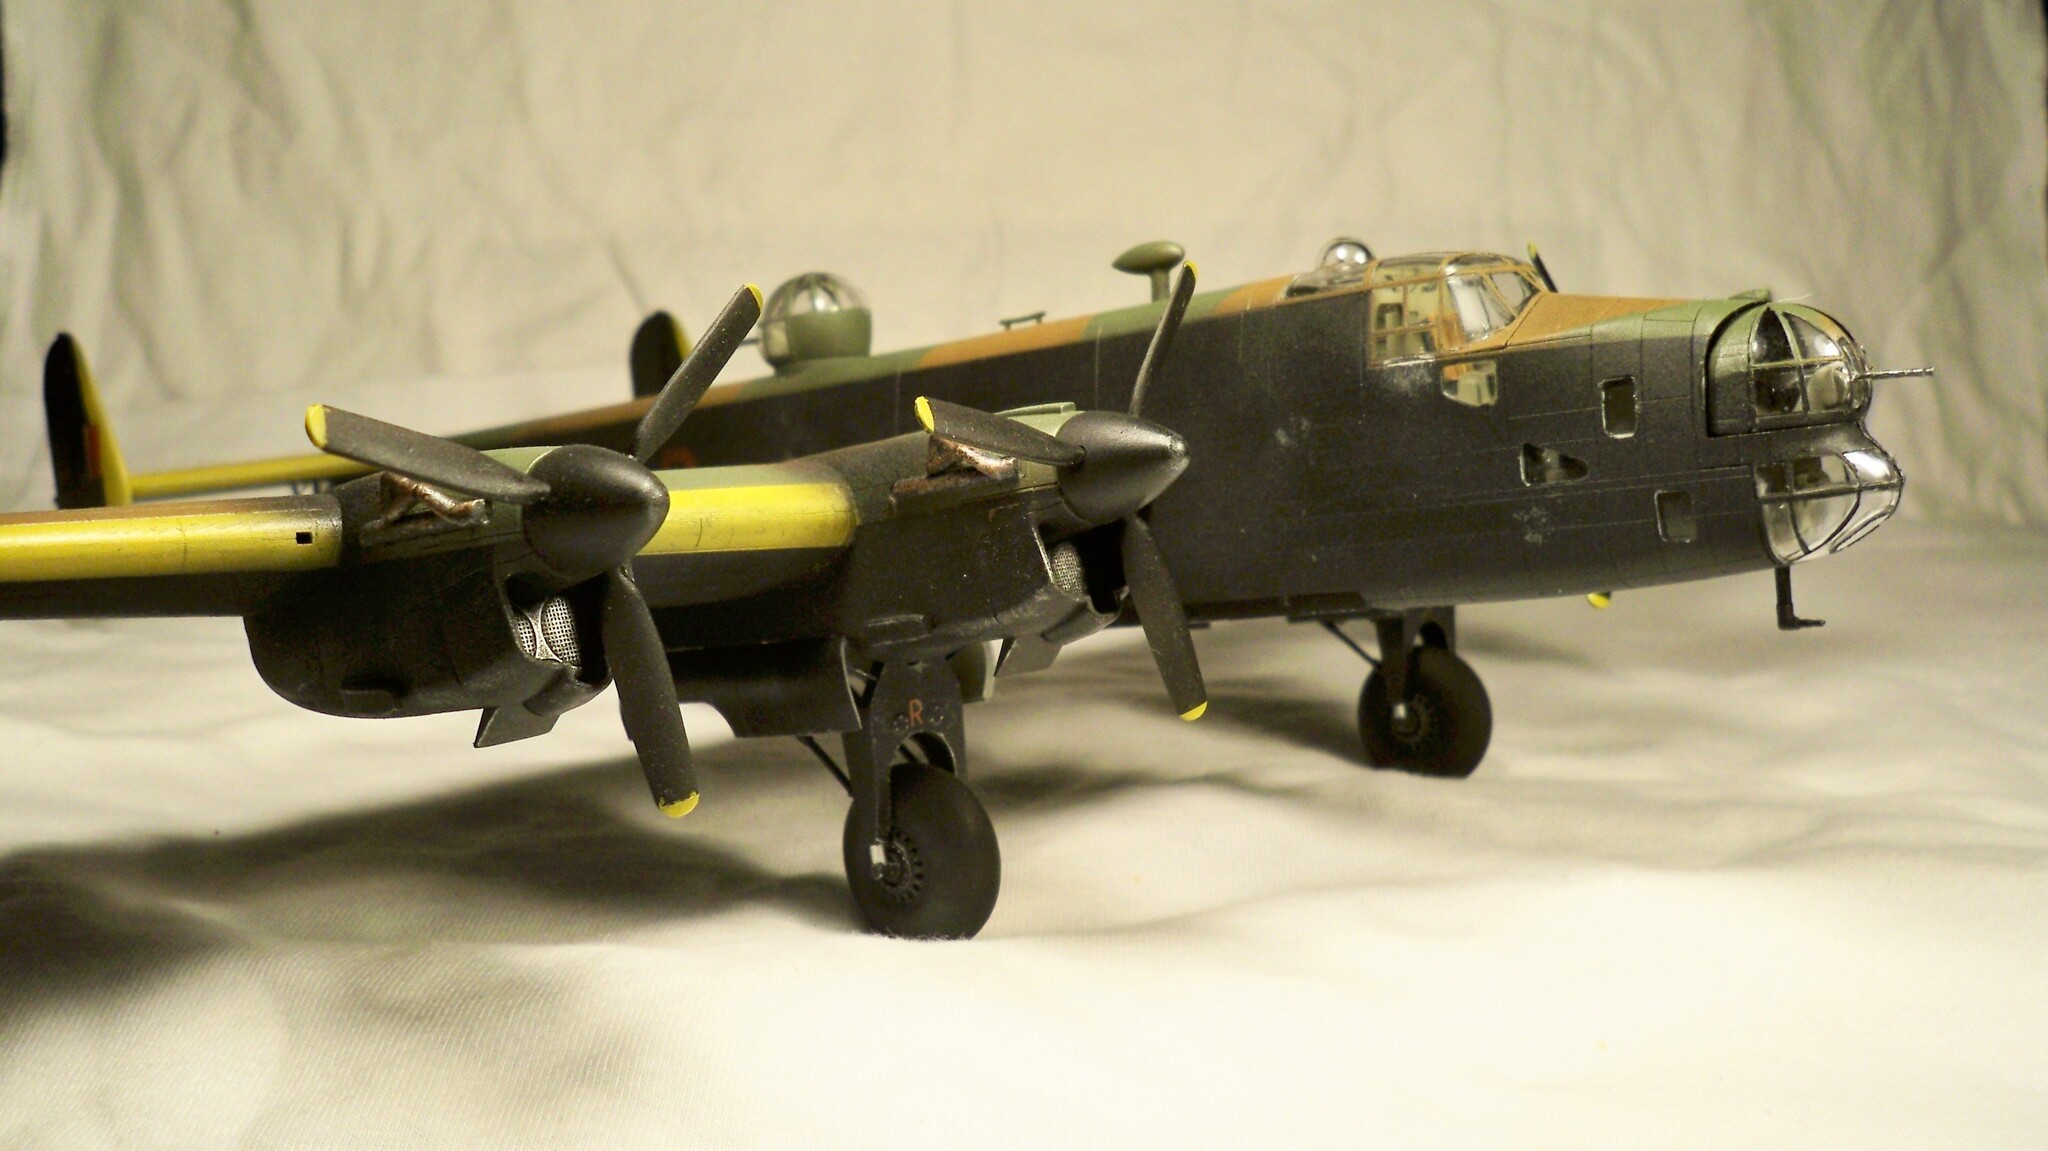 Handley Page Hallifax, Revell, 1:72 - My, Modeling, Stand modeling, Scale model, Revell, Bomber, Longpost